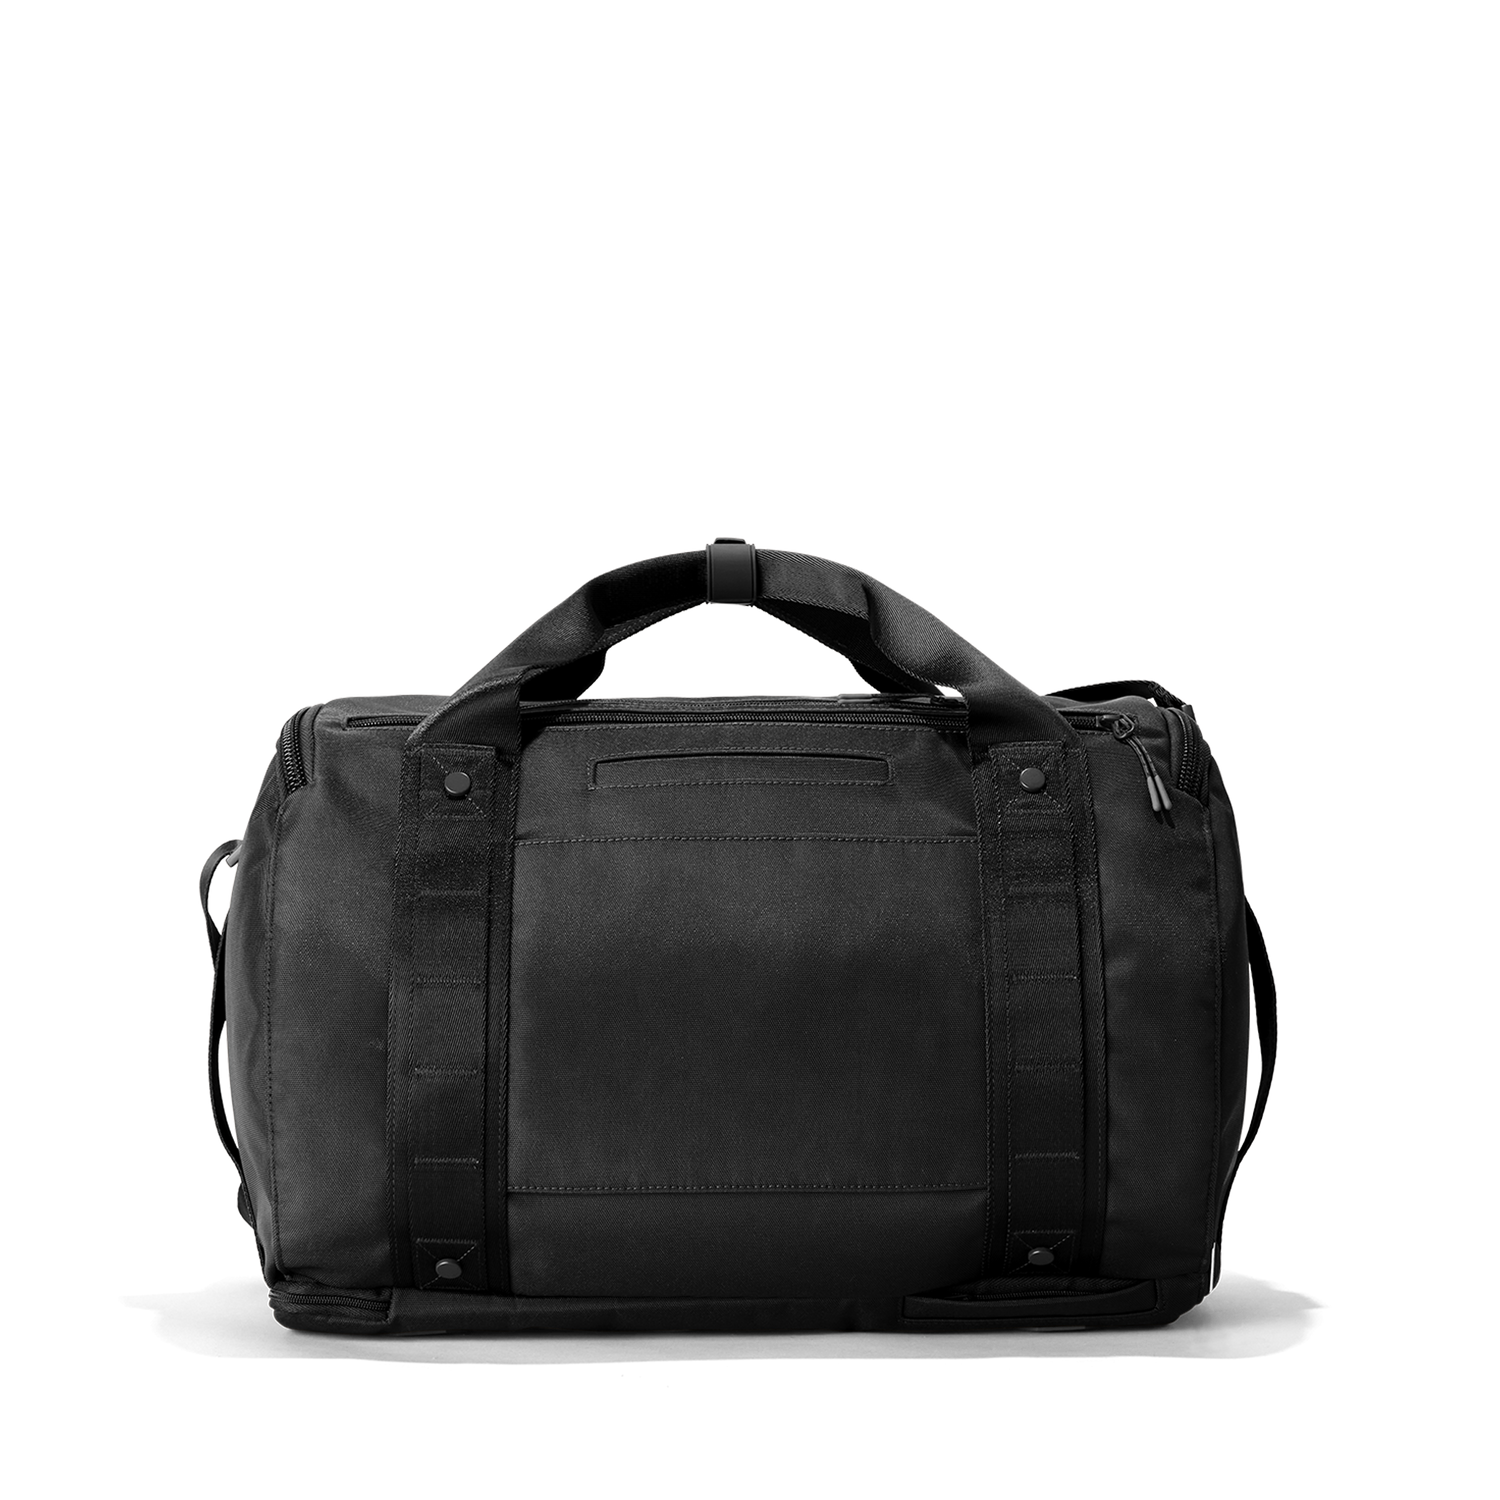 Dagne Dover Extra Small Landon Carryall Duffle Bag in Onyx